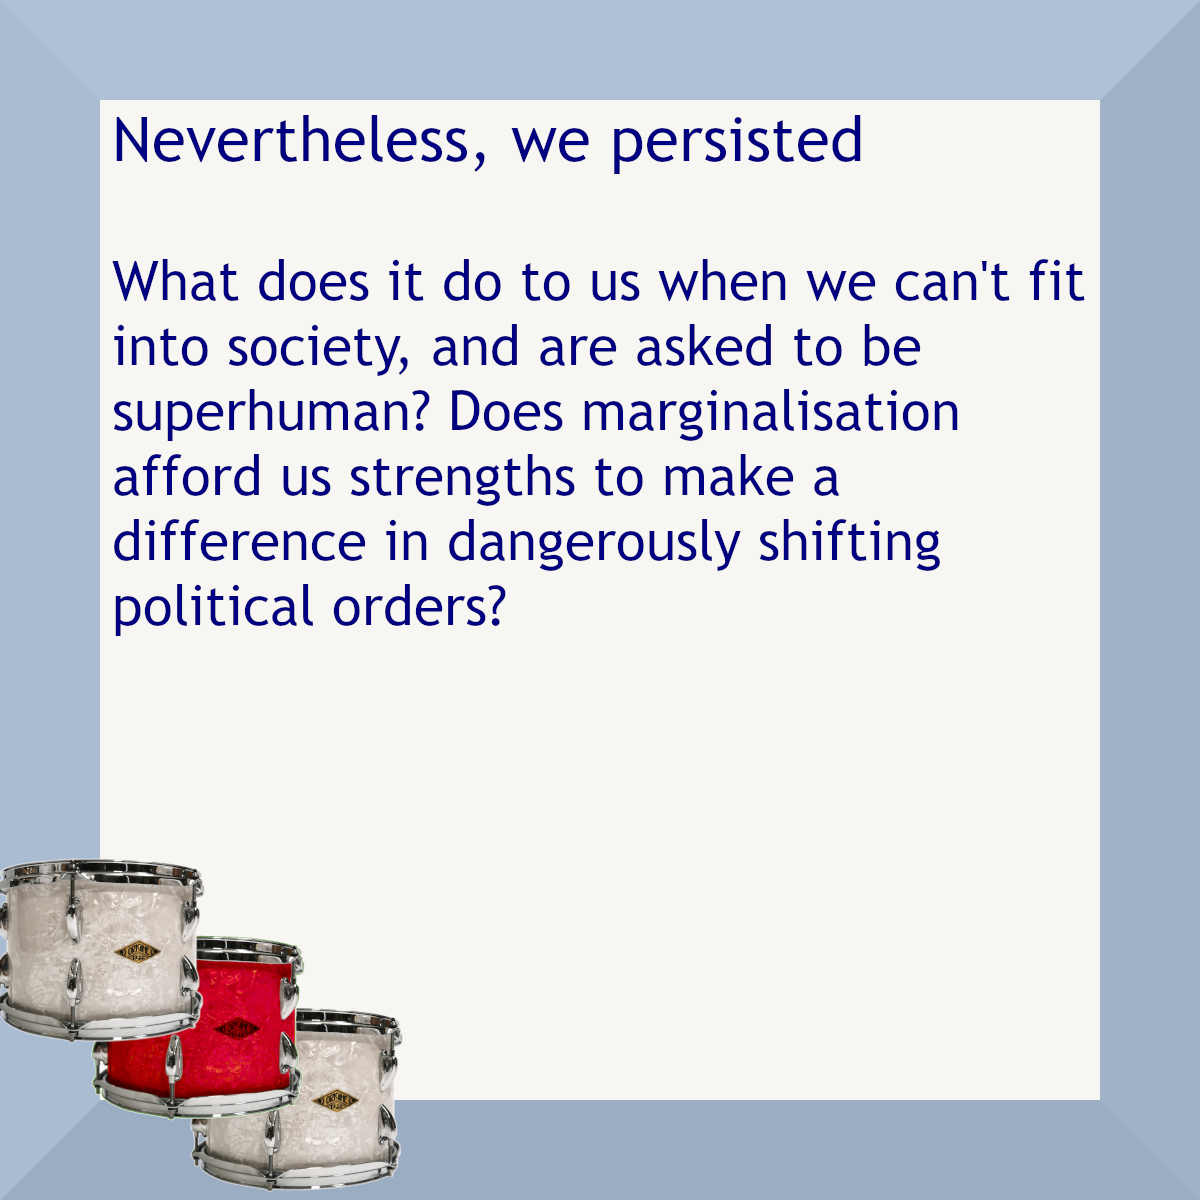 Blue border with three drums, one red. Text: Nevertheless, we persisted. What does it do to us when we can't fit into society, and are asked to be superhuman? Does marginalisation afford us strengths to make a difference in dangerously shifting political orders?